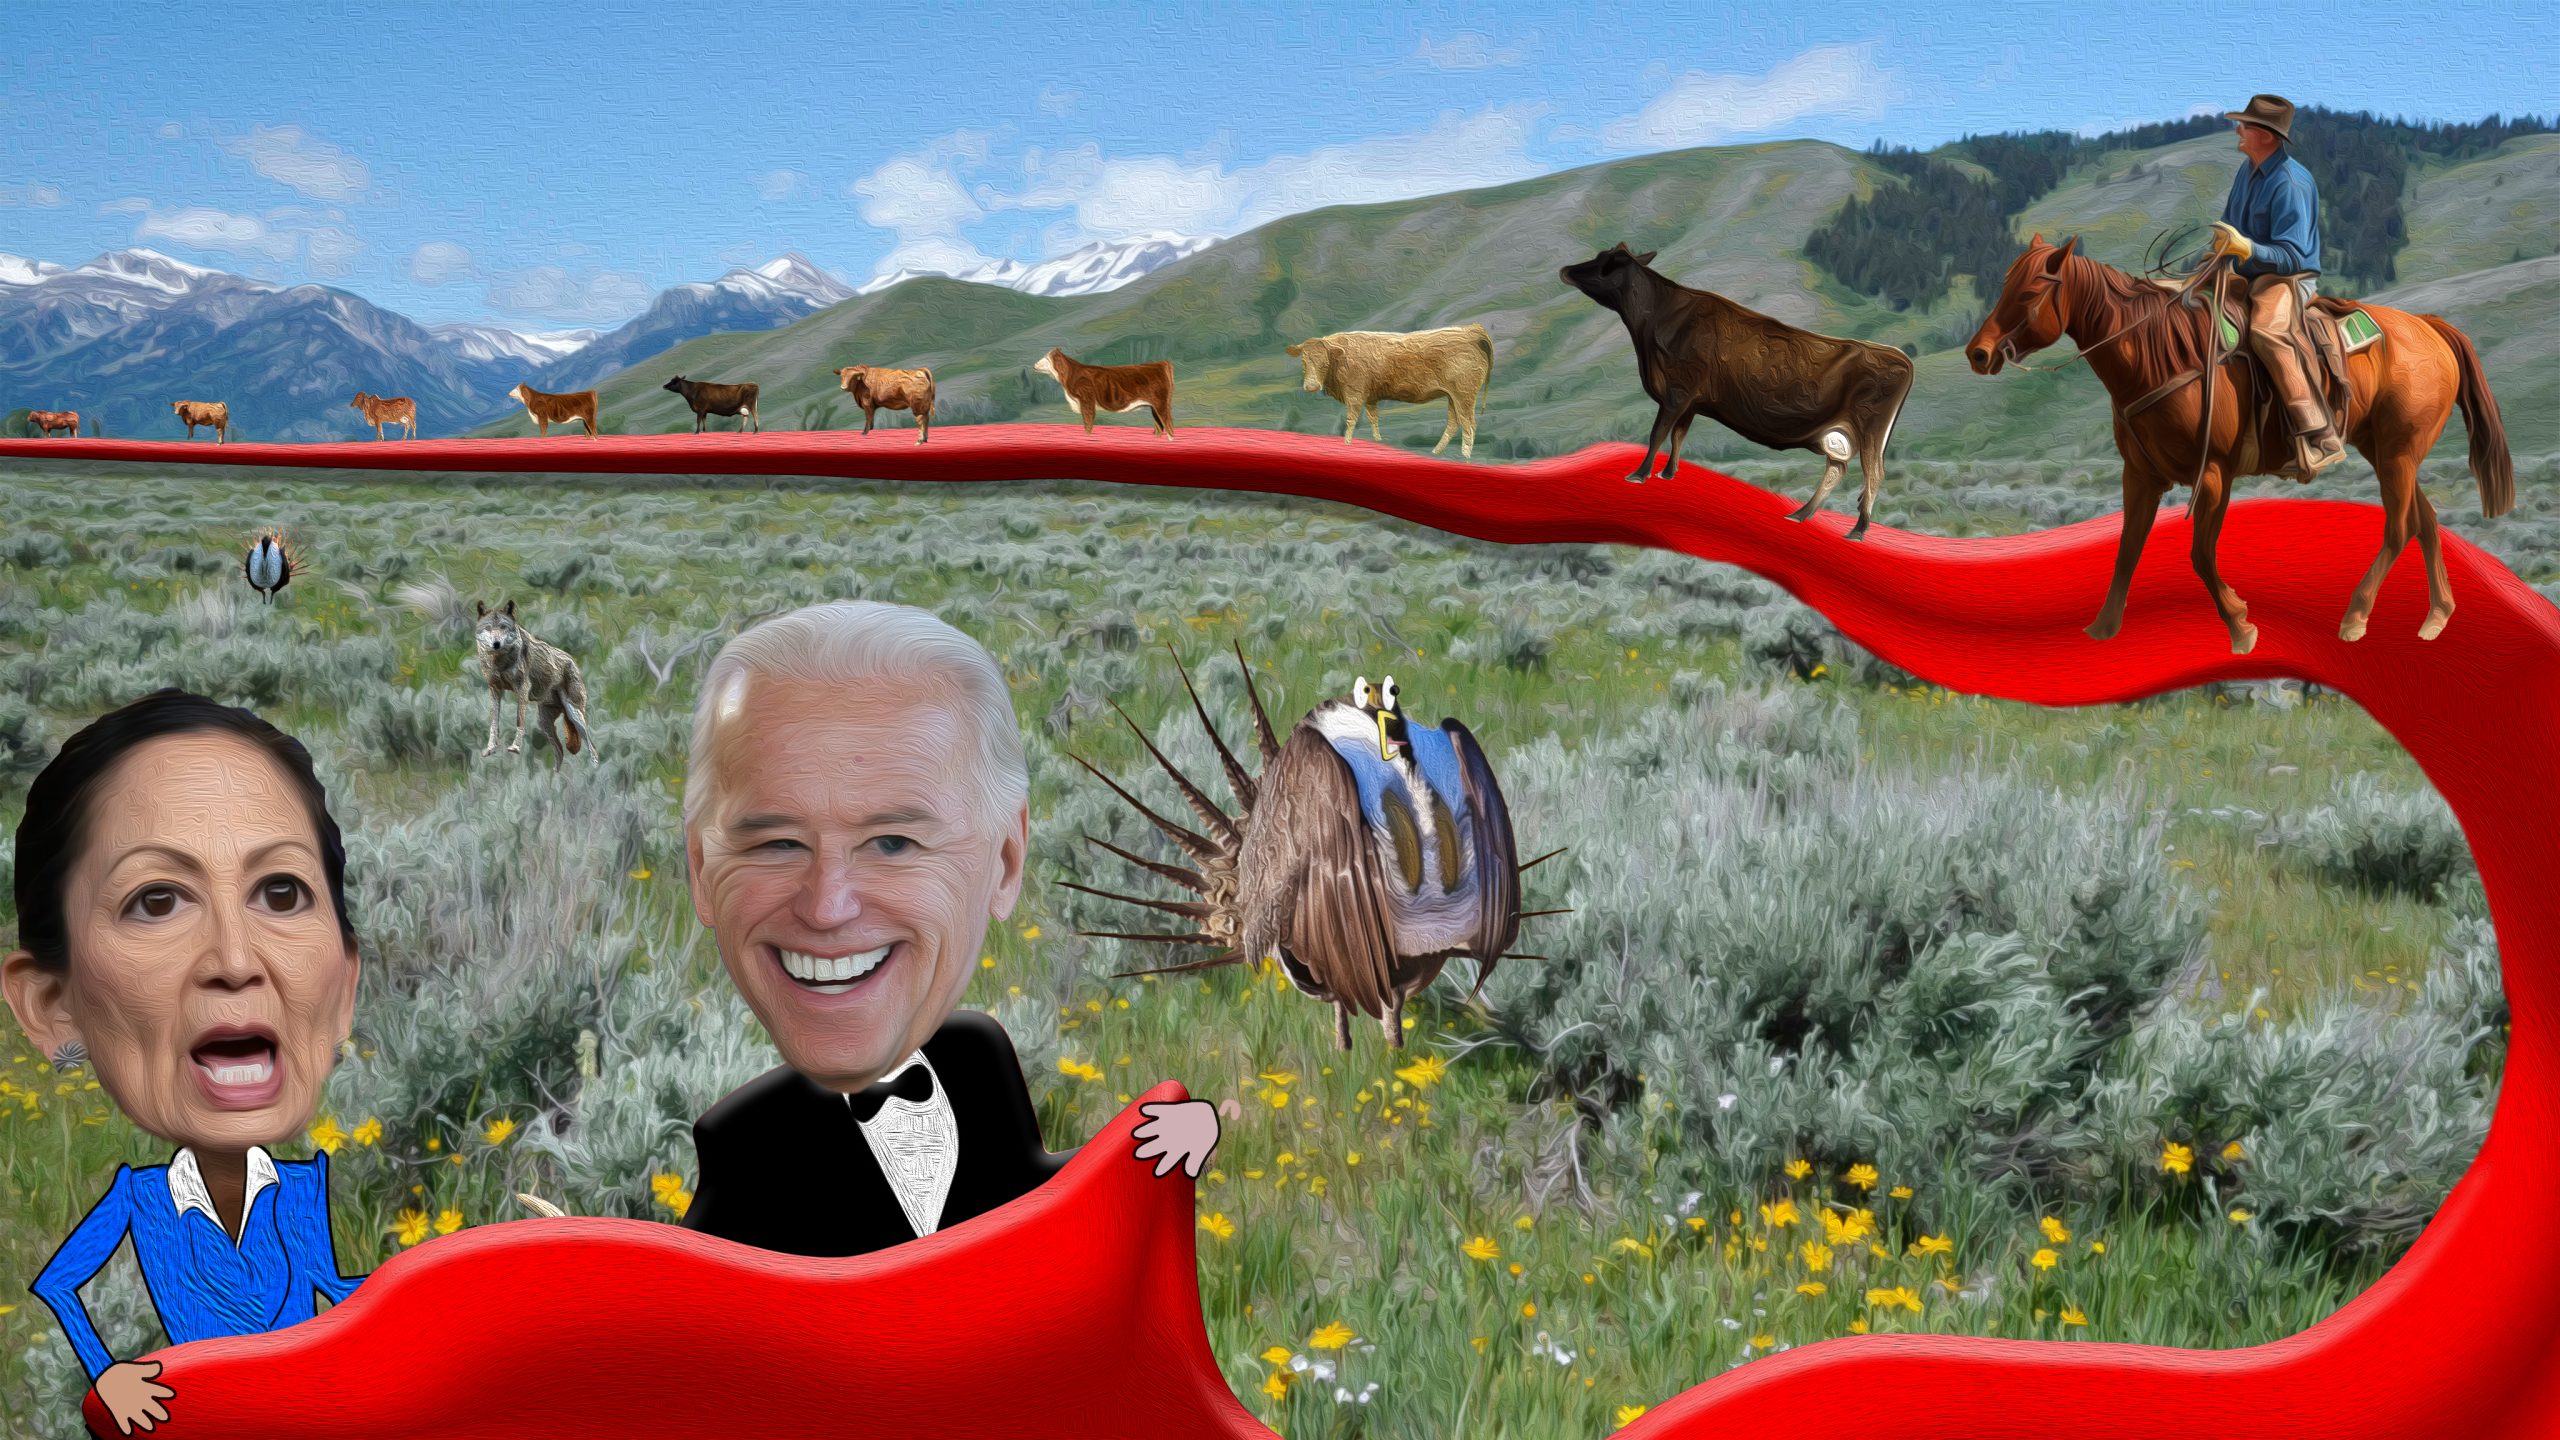 Red Carpet Rollout: Biden Admin Announces Lowest Allowable Fees for ‘Welfare’ Cattle Ranching on Public Lands